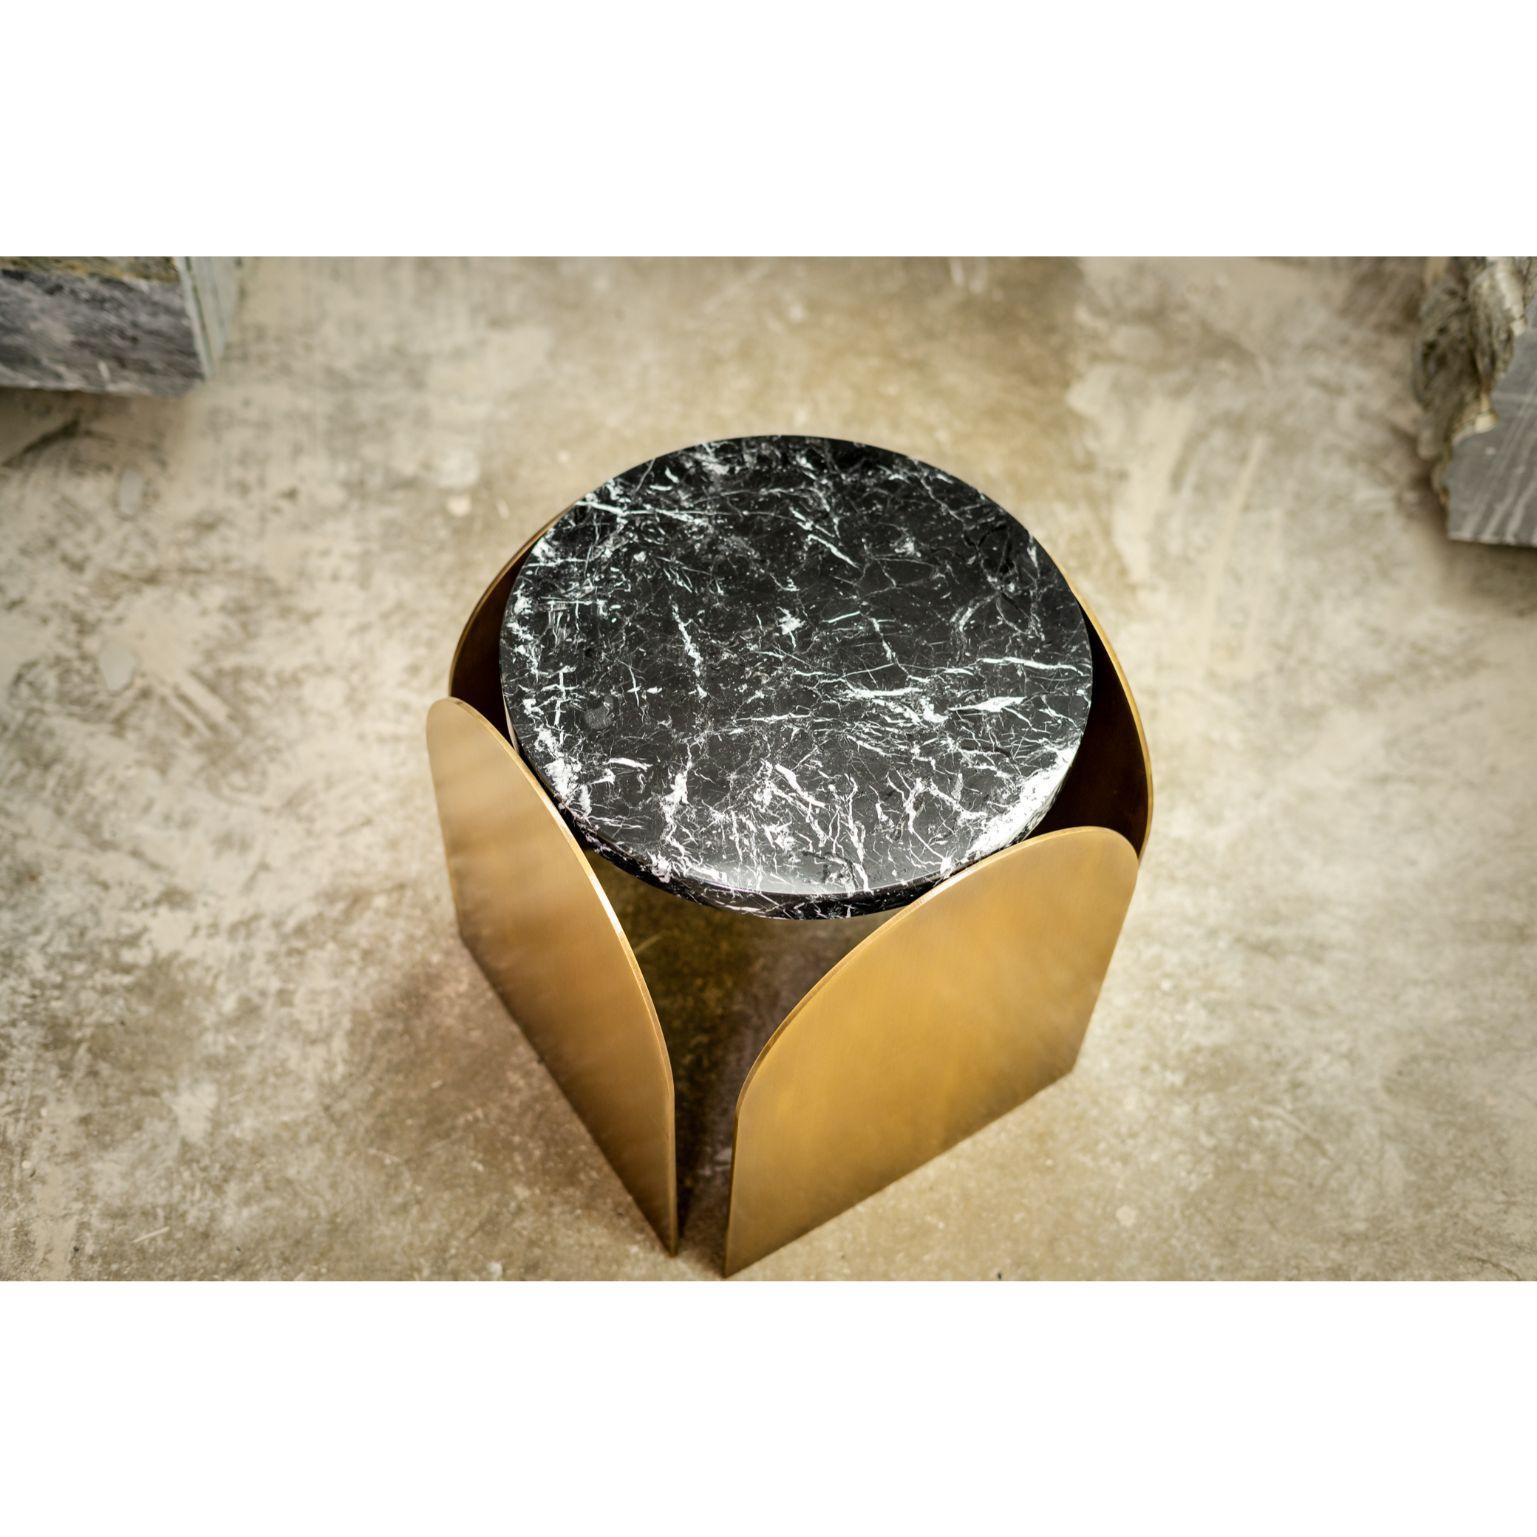 Arcade marble side table by Essenzia
Materials: Nero marquina, brushed brass
Dimensions: 40 x 40 x 45 cm

Also Available: India Green

Side table inspired by architectural proportions of ancient Rome. The structure is made of brushed brass